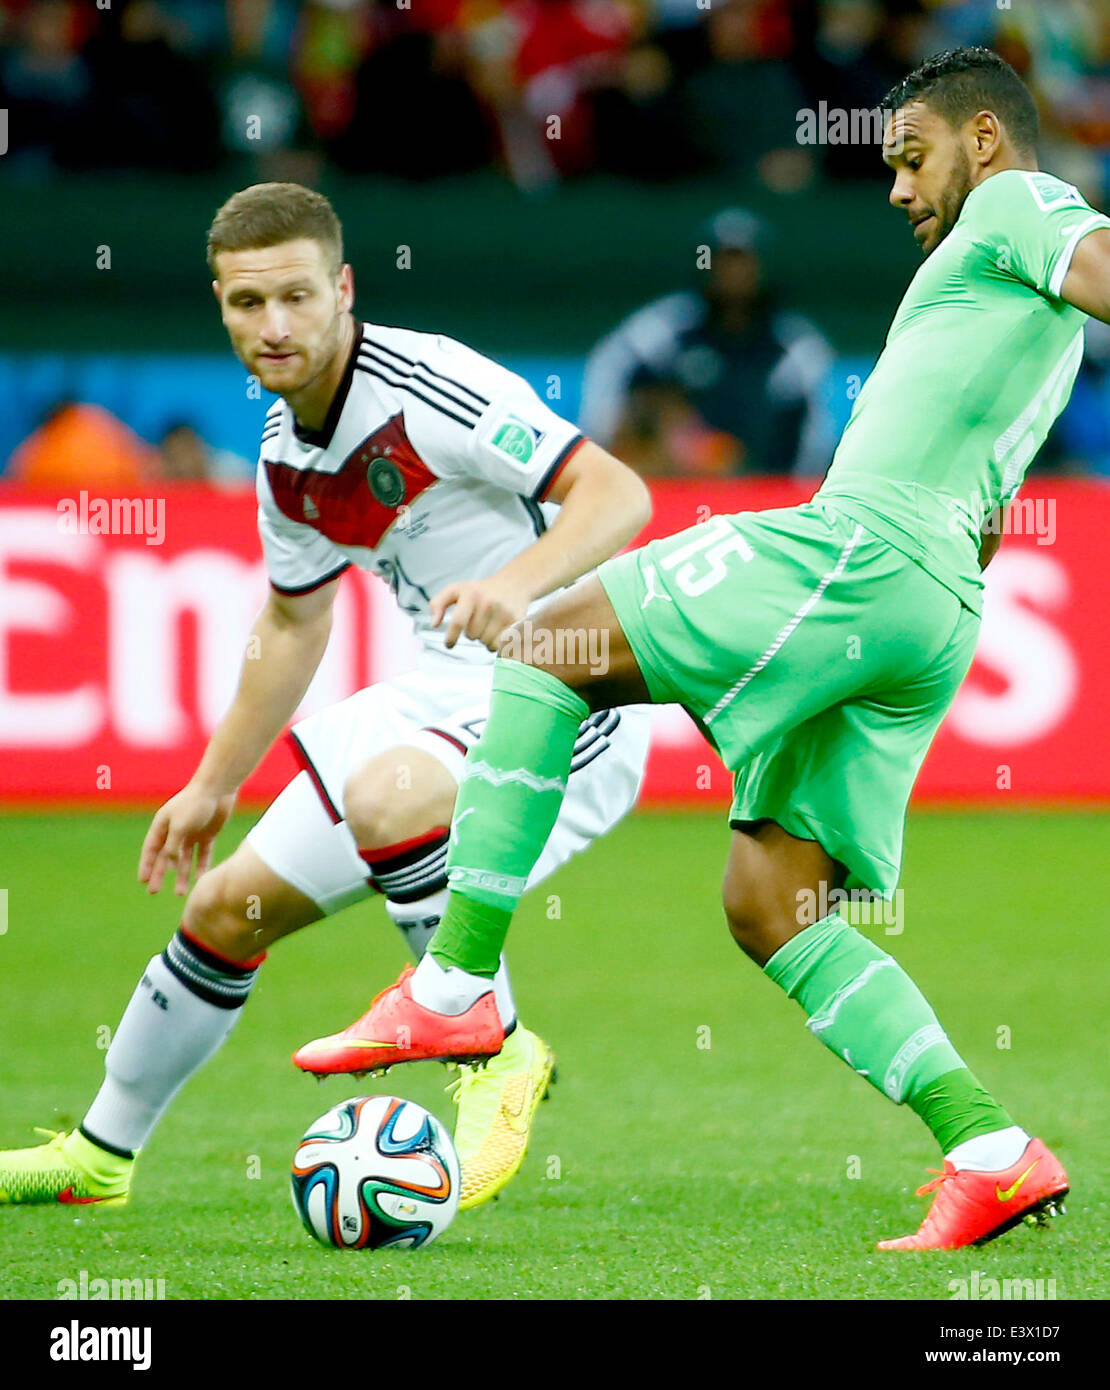 Porto Alegre, Brazil. 30th June, 2014. Germany's Shkodran Mustafi vies with Algeria's Hilal Soudani during a Round of 16 match between Germany and Algeria of 2014 FIFA World Cup at the Estadio Beira-Rio Stadium in Porto Alegre, Brazil, on June 30, 2014. Credit:  Chen Jianli/Xinhua/Alamy Live News Stock Photo